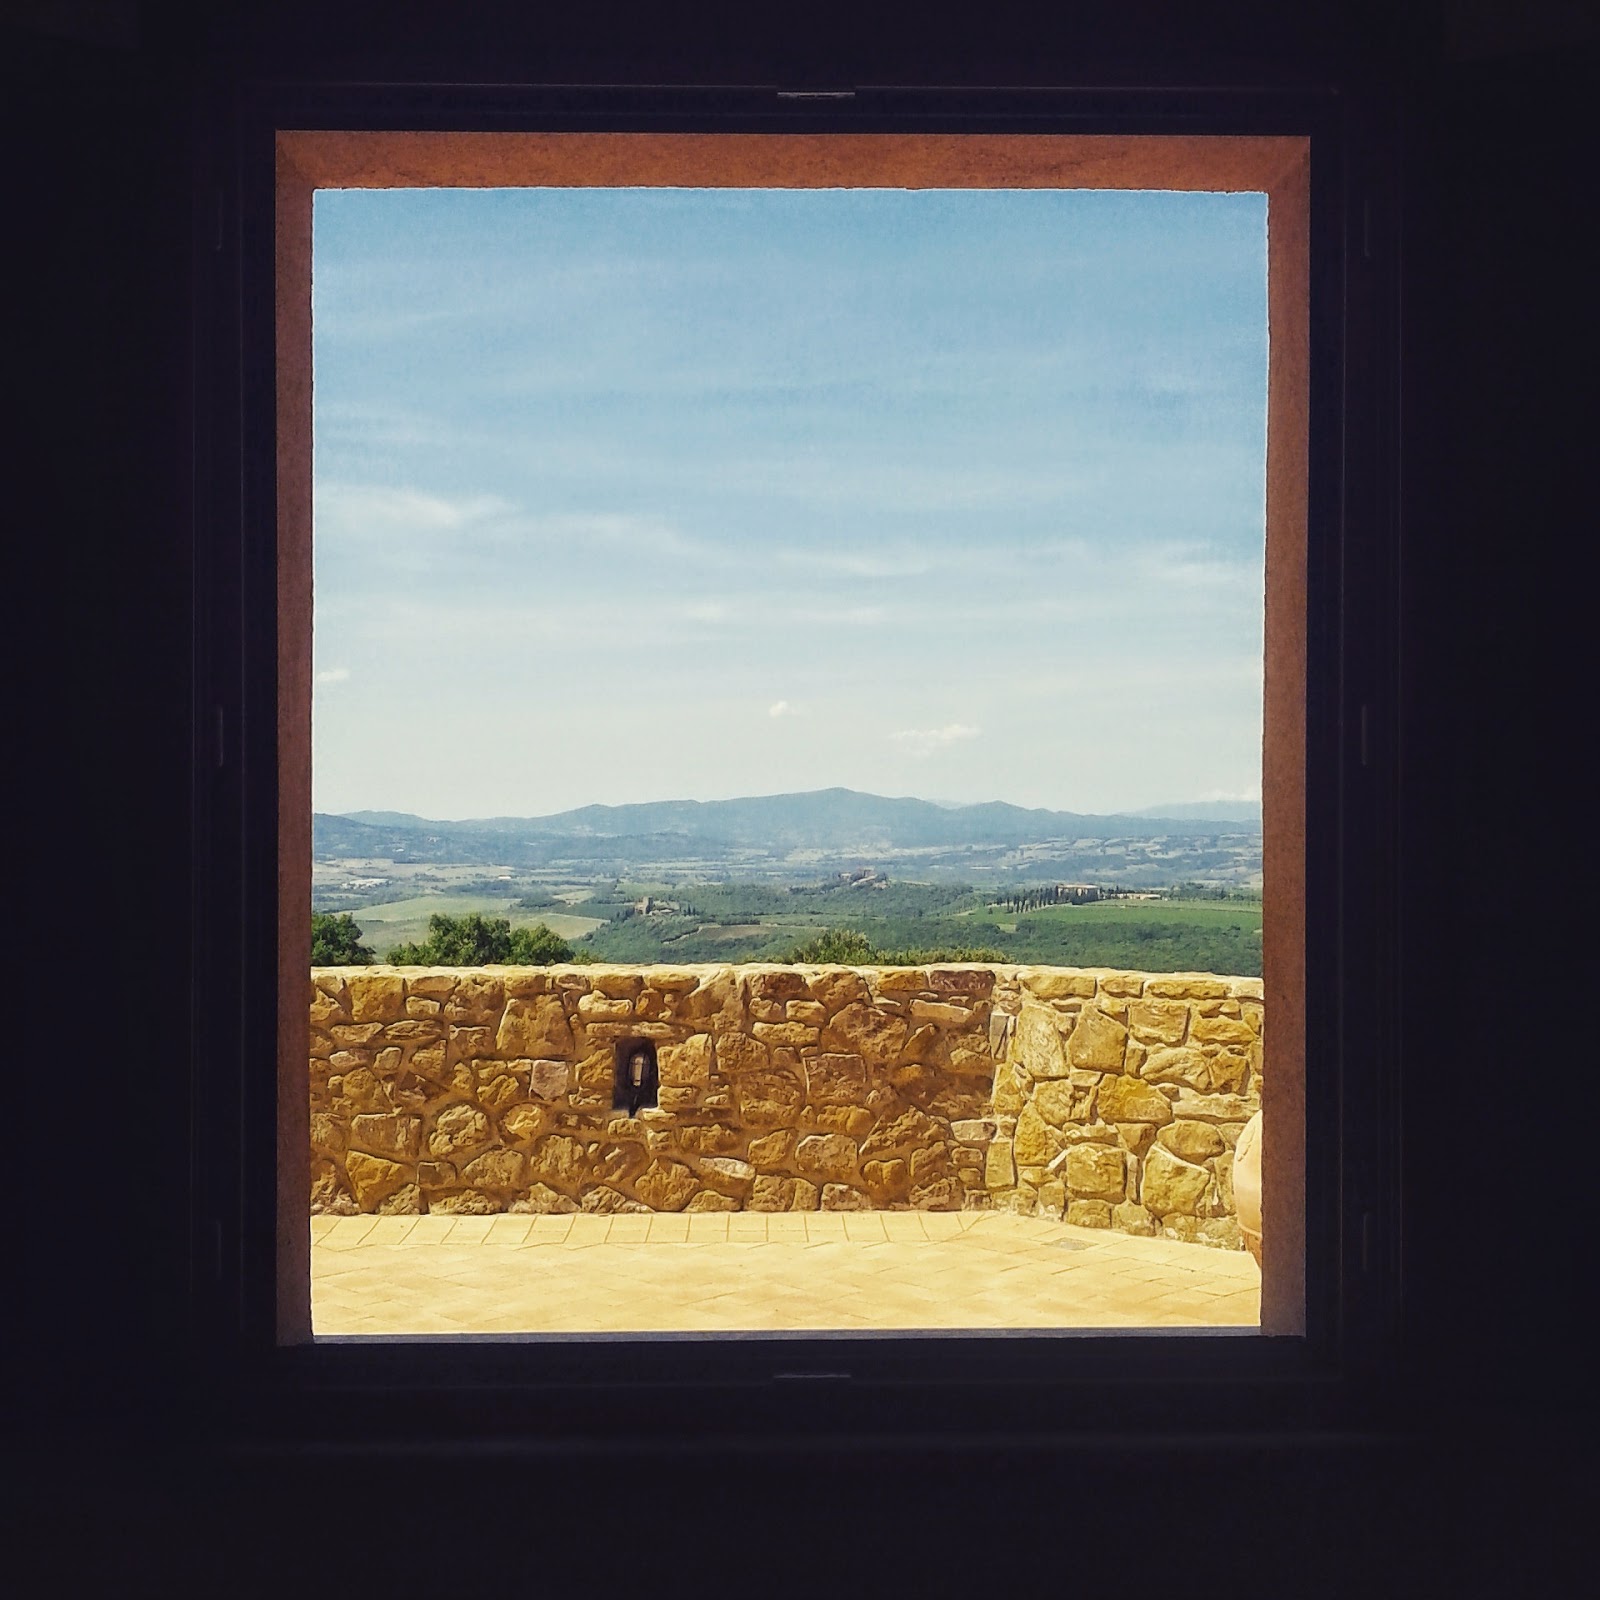 The Tuscan landscaped seen through the window of a winery